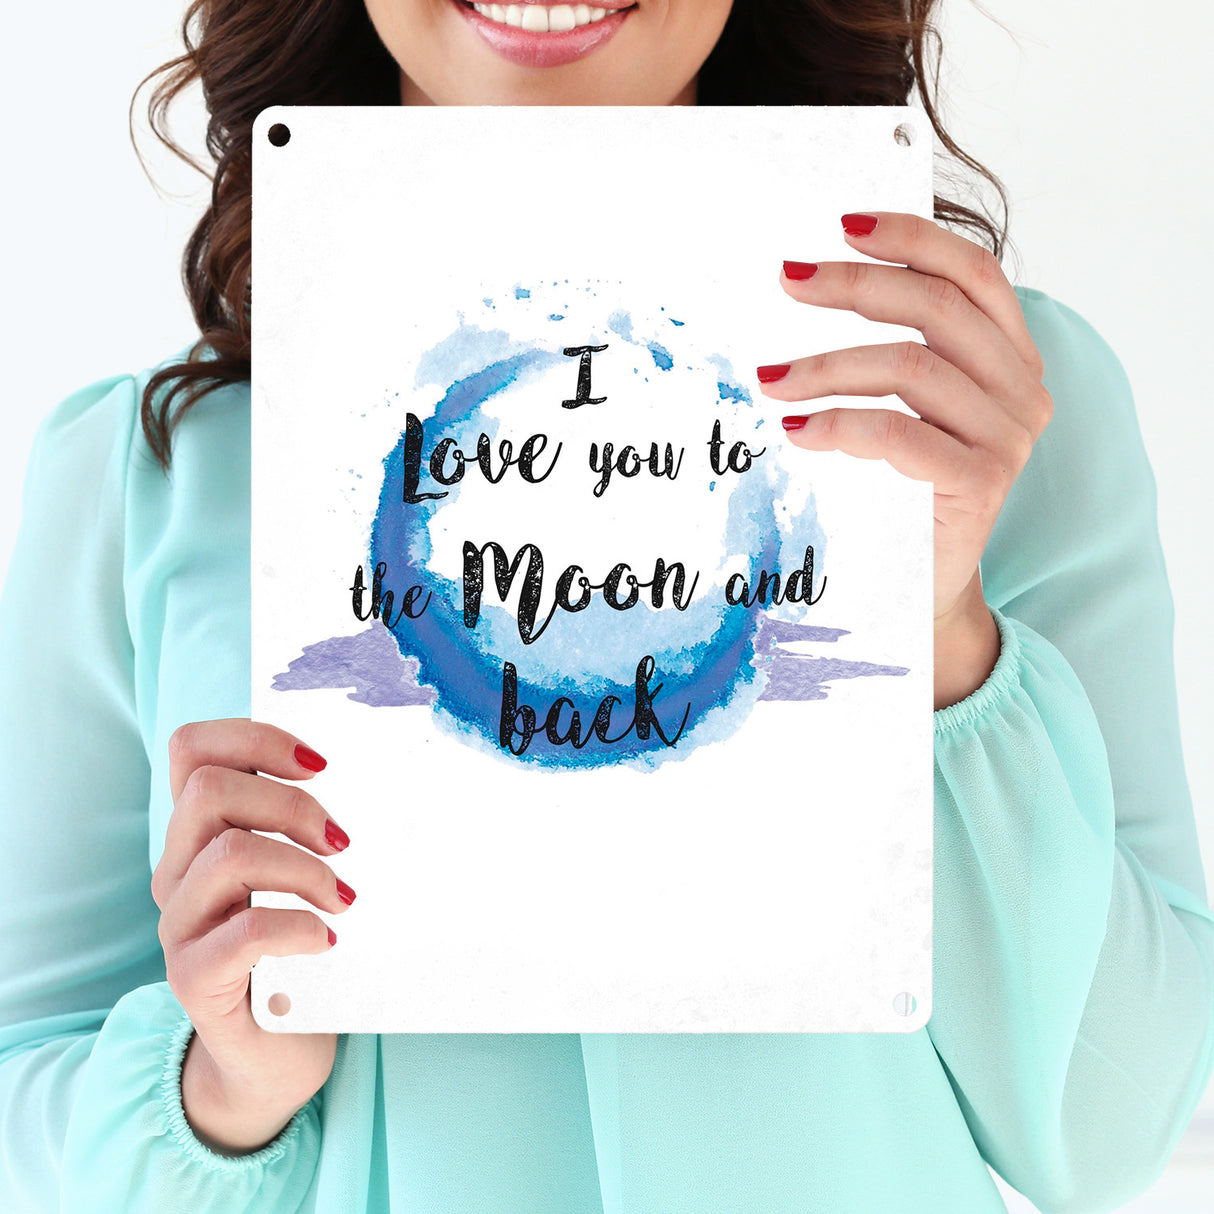 I love you to the Moon and back Valentinstag Metallschild in lila